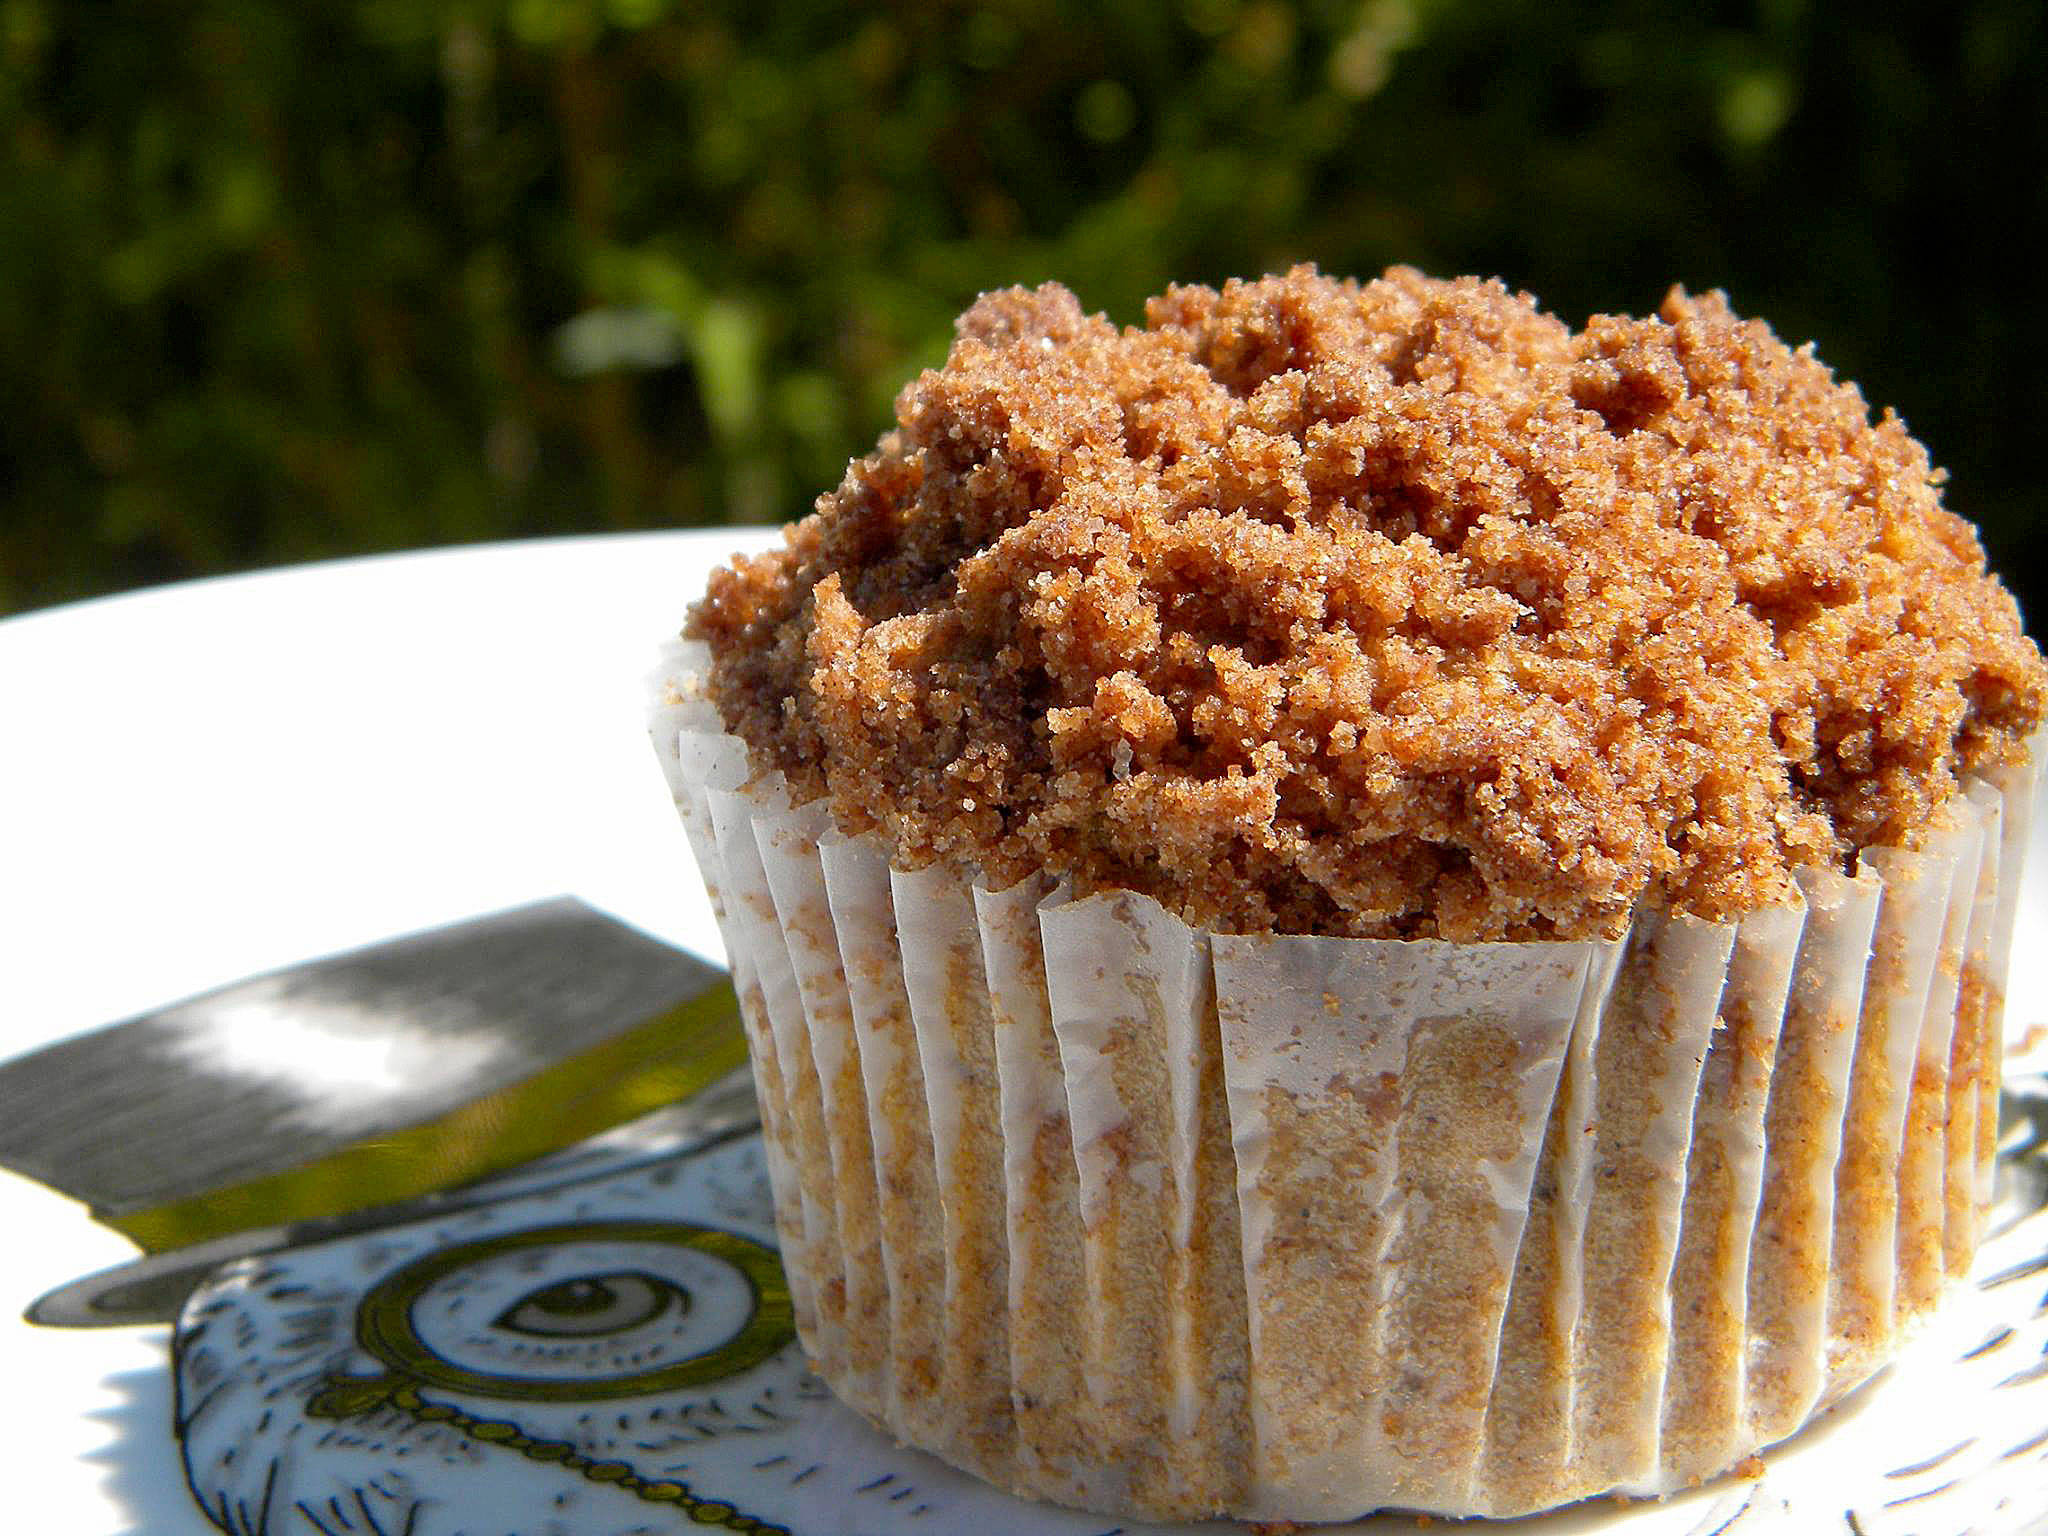 Laughing Dog Kitchen’s coffee cake muffin is one of their most popular items.                                Photo courtesy Danielle George / Laughing Dog Kitchen